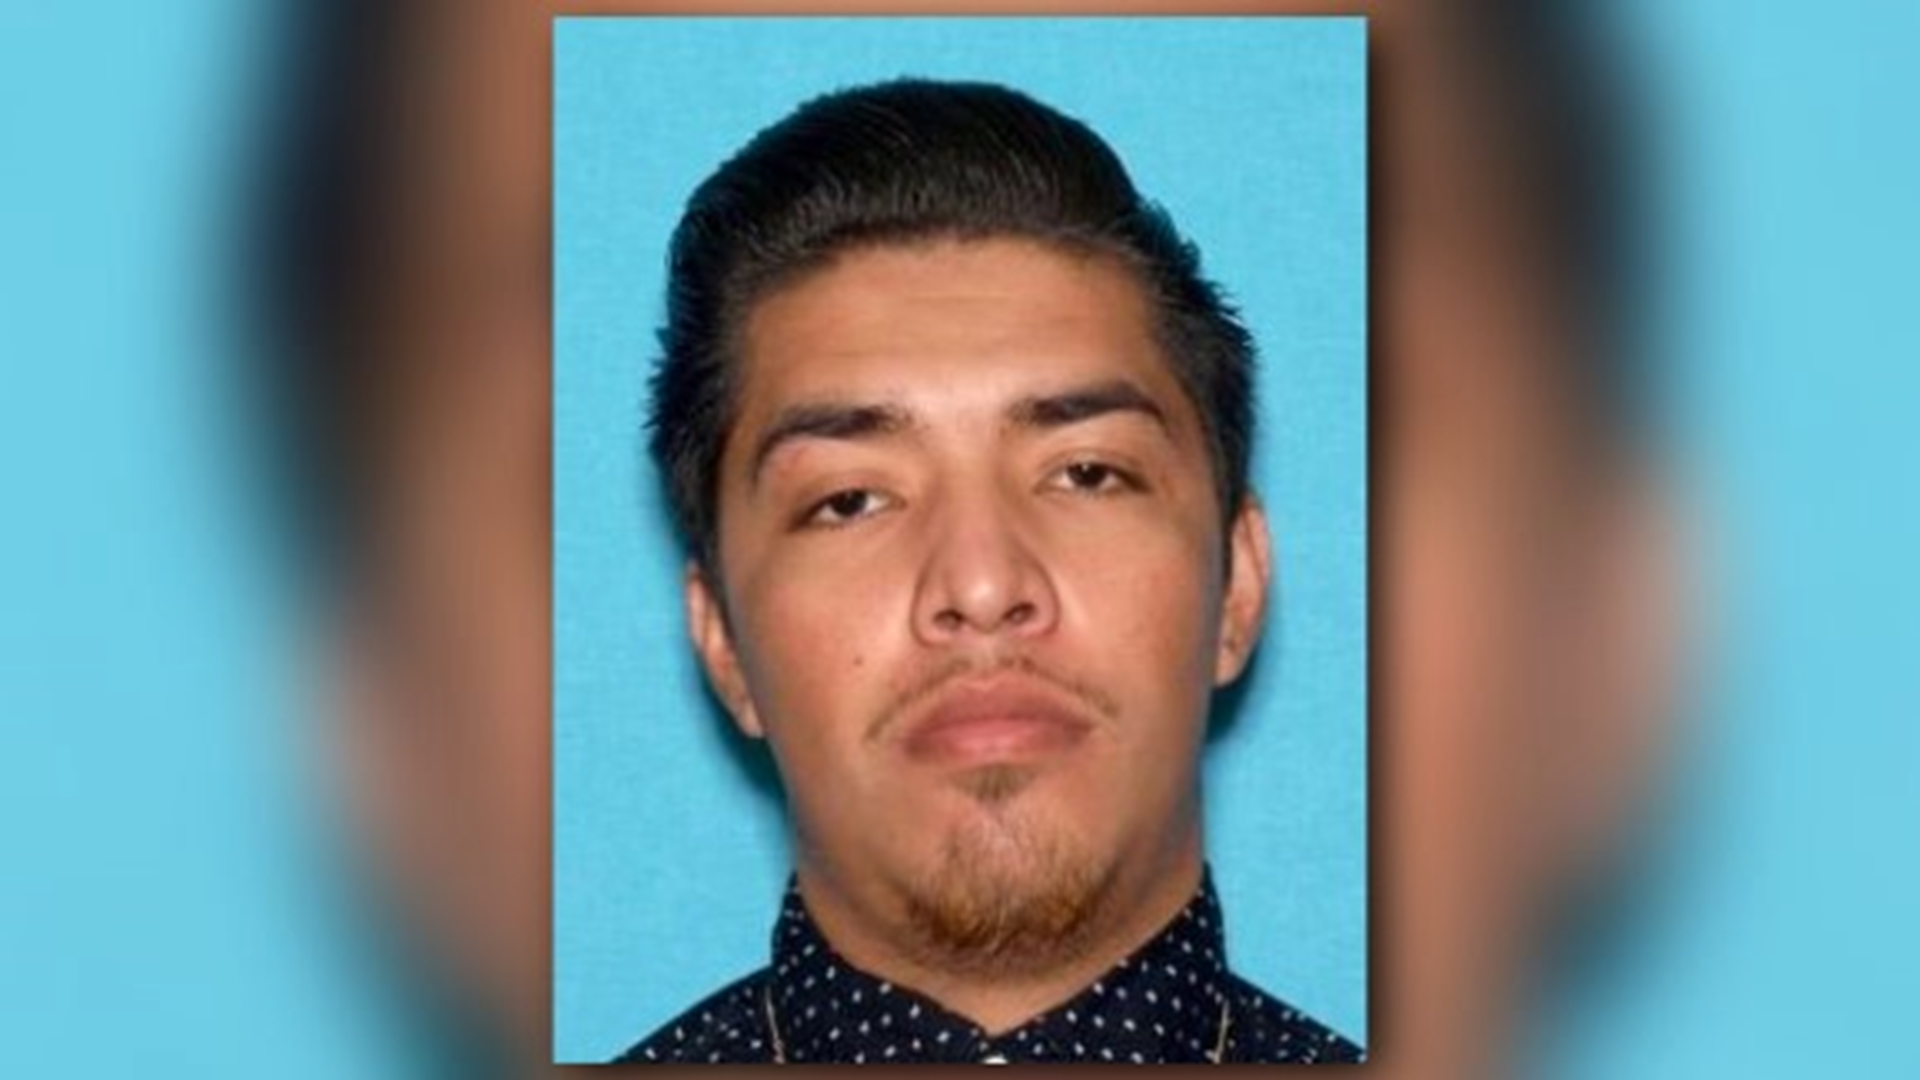 Los Angeles County sheriff's homicide investigators have confirmed that a baby girl found dead is the daughter of a missing Northern California man. The baby's father, 22-year-old Alexander Echeverria, is still missing.